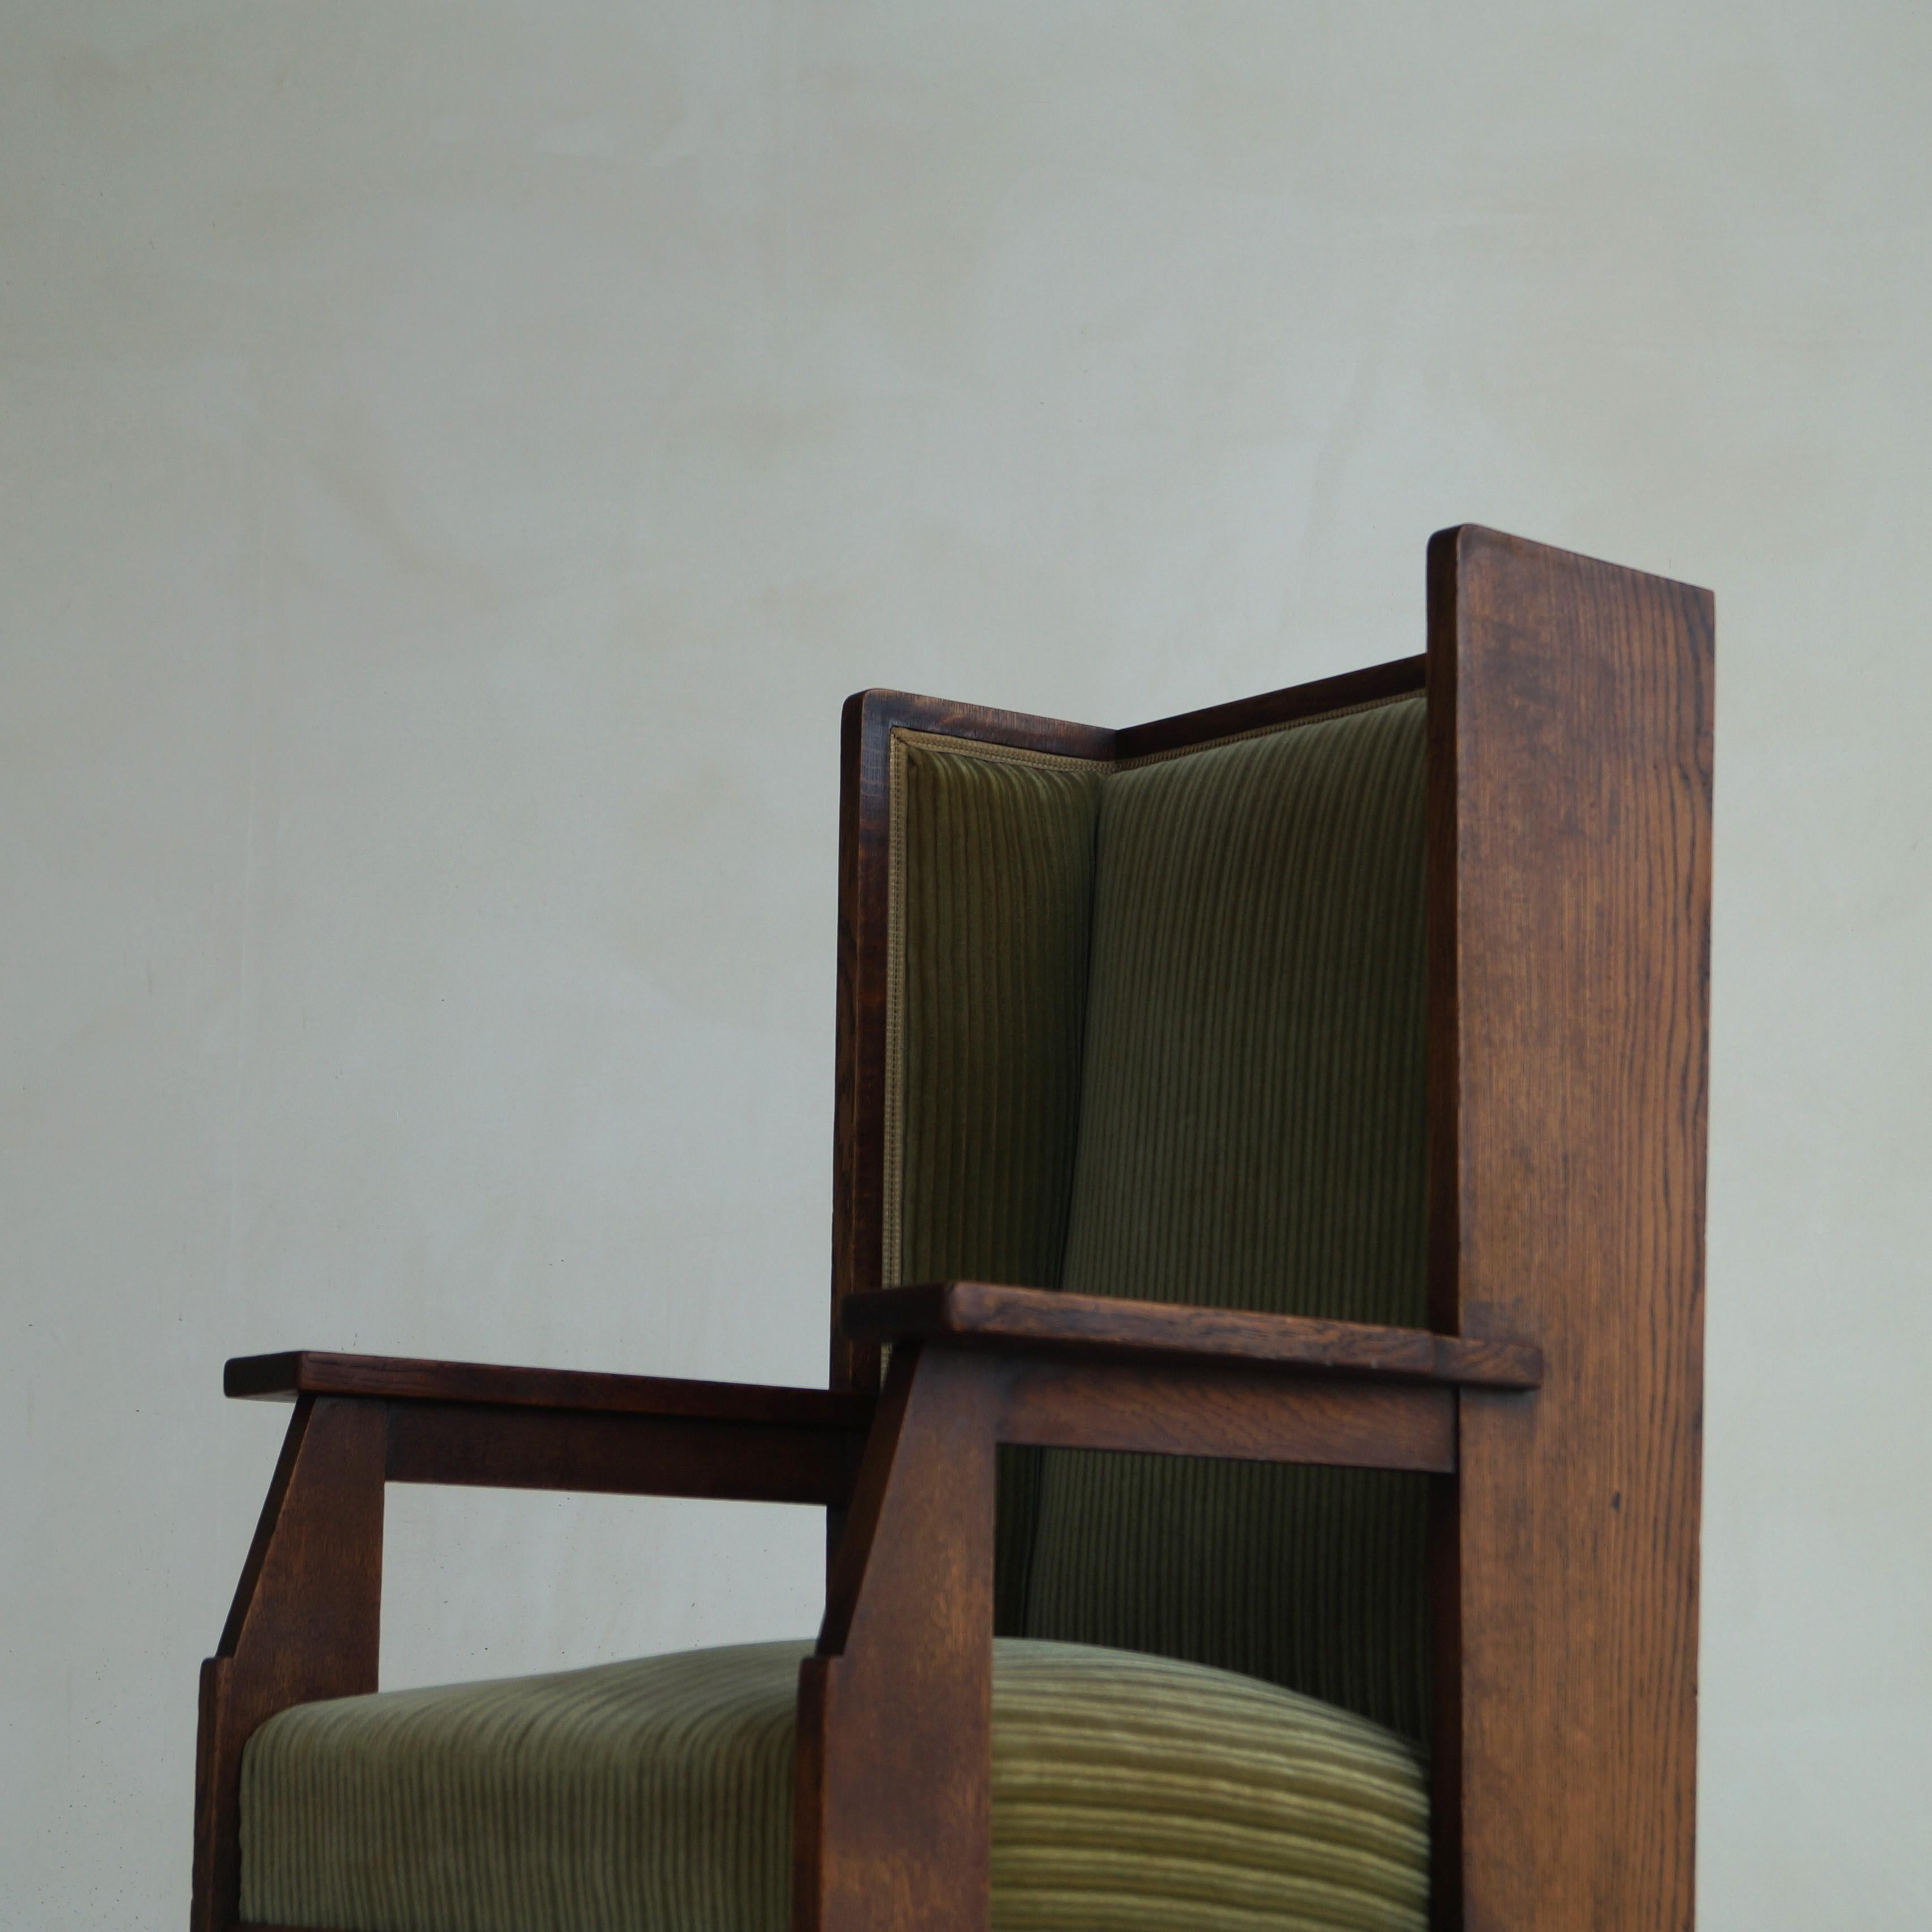 Early 20th Century Dutch Art Deco Haagse School high back chair by Hendrik Wouda for Pander, 1924 For Sale